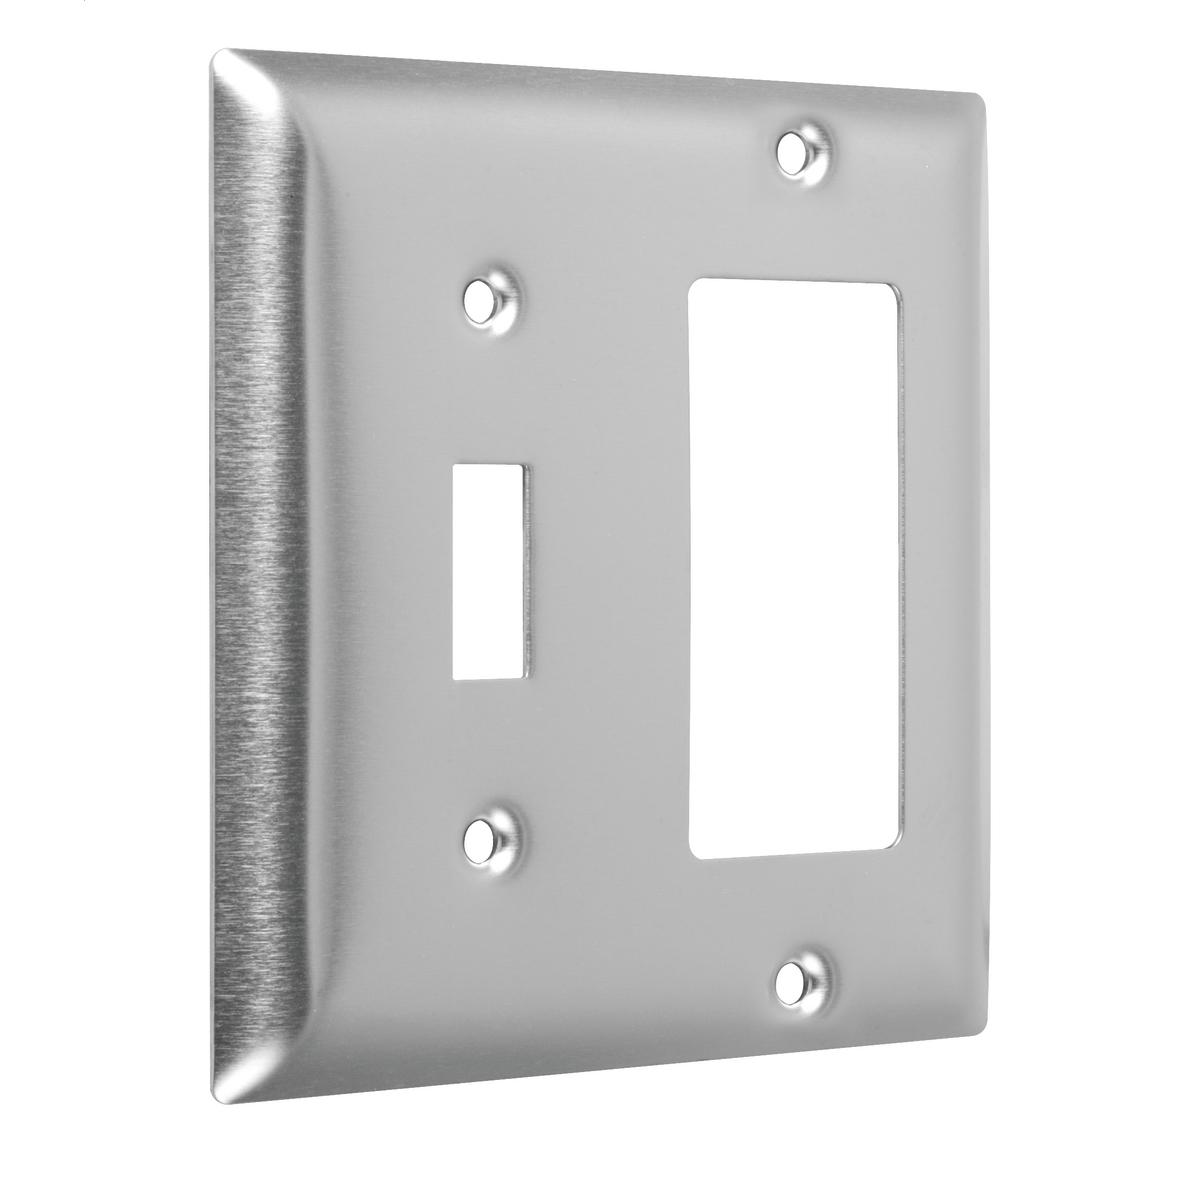 Hubbell WSS-TR 2-Gang Metal Wallplate, Standard, Toggle/Decorator, Stainless Steel  ; Easily primed and painted to match or complement walls. ; Won't bow, crack or distort during installation. ; Premium North American powder coat. ; Includes screw(s) in matching finish.